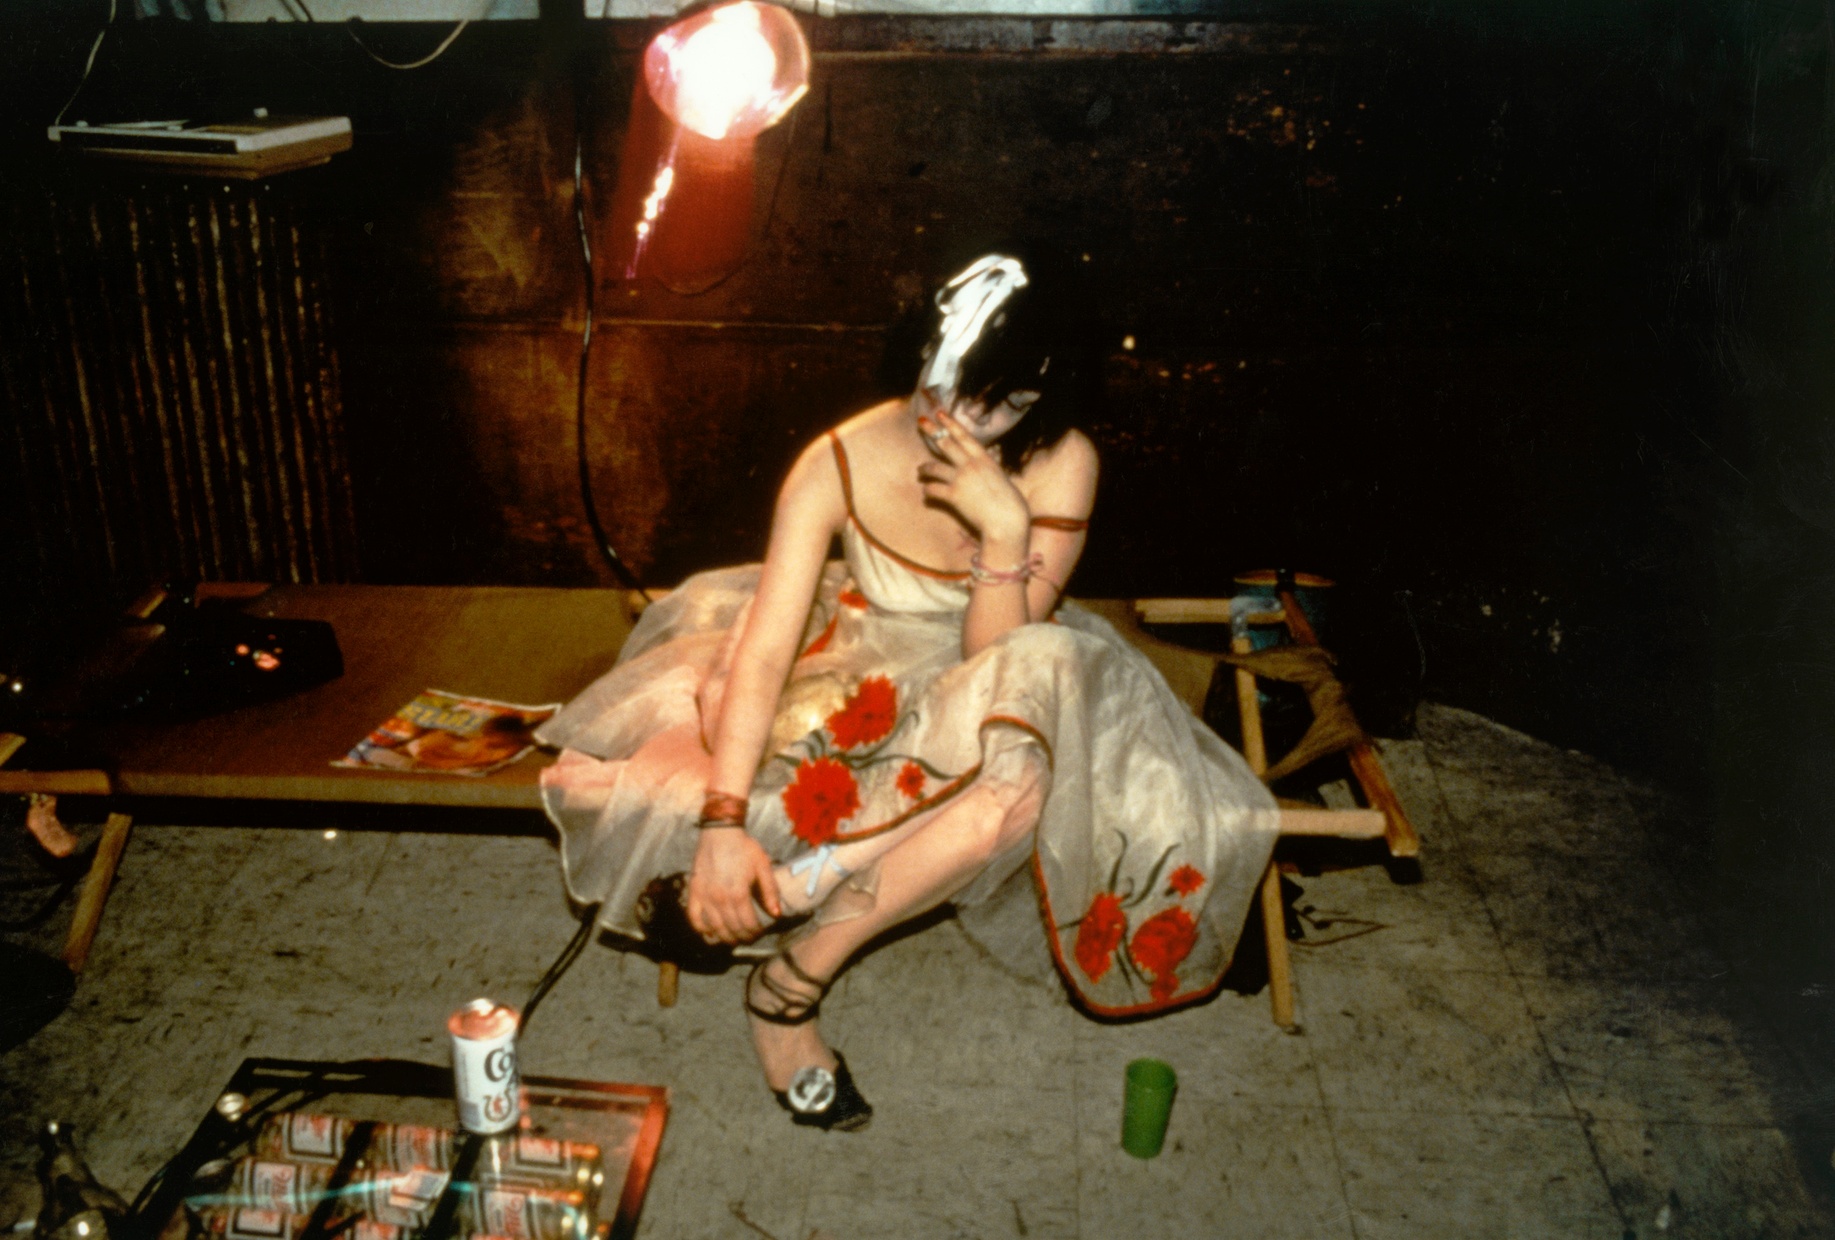 A photograph by Nan Goldin titled "Trixie on the cot, New York City 1979" and features a figure wearing a dress sitting on a coffee table with legs crossed, smoking a cigarette